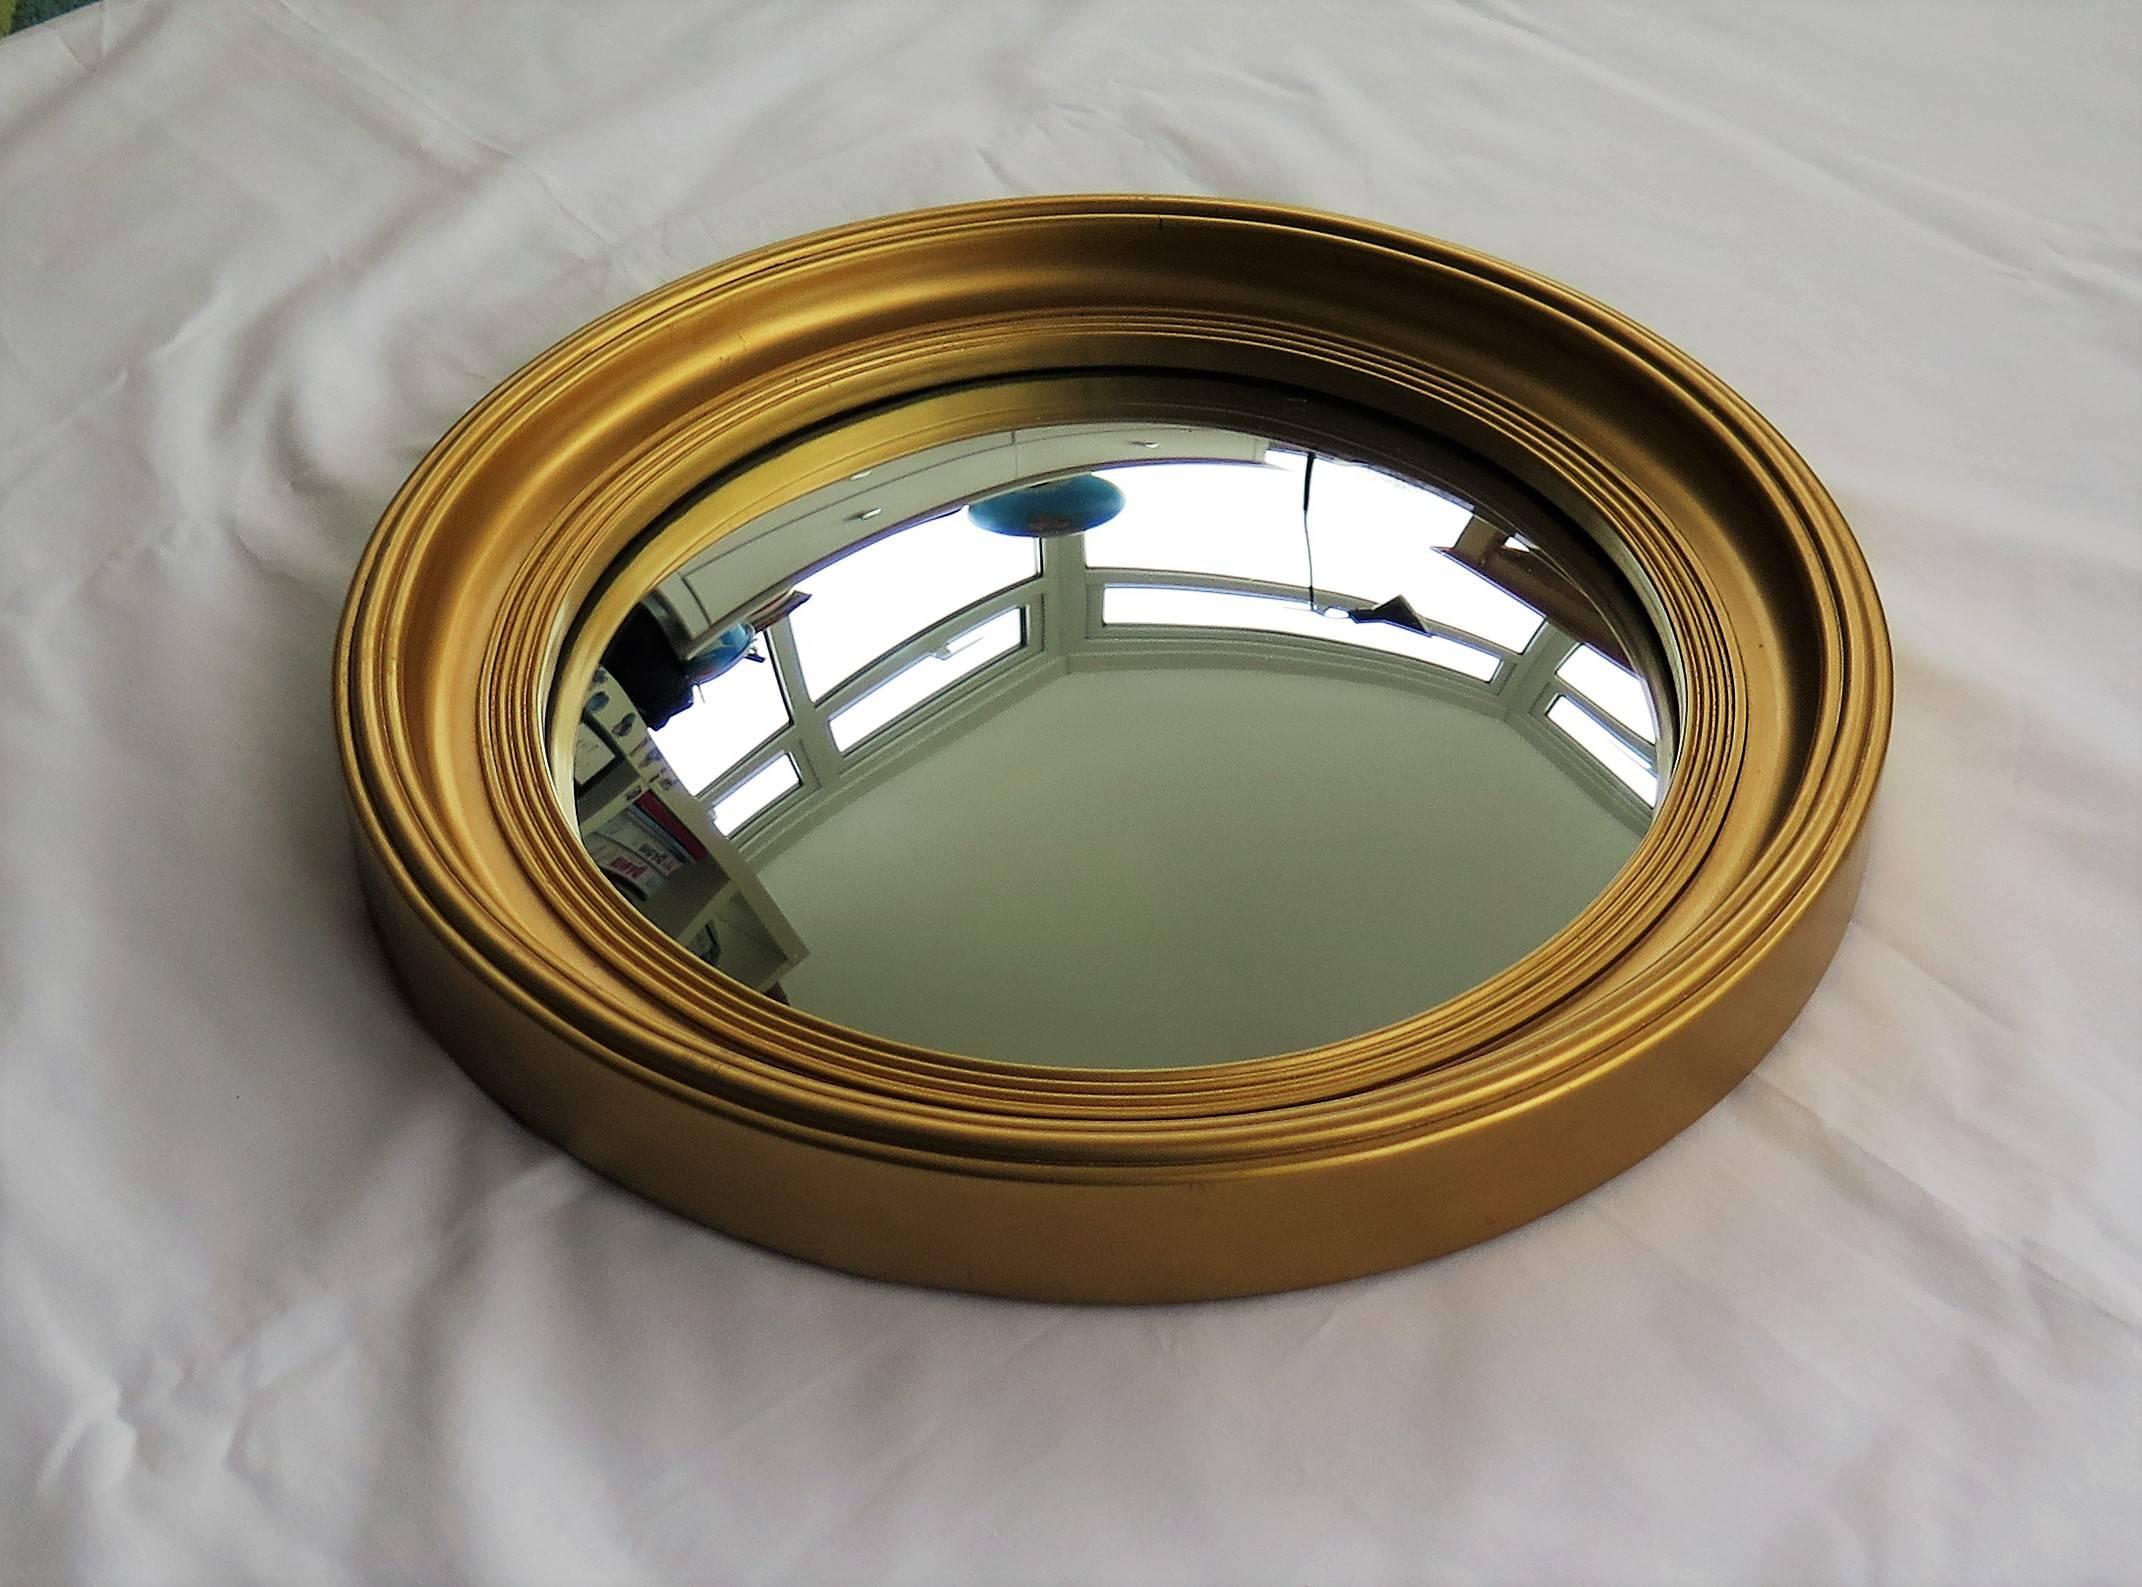 20th Century Round Convex Mirror Giltwood in Regency Style with reeded detail, circa 1920